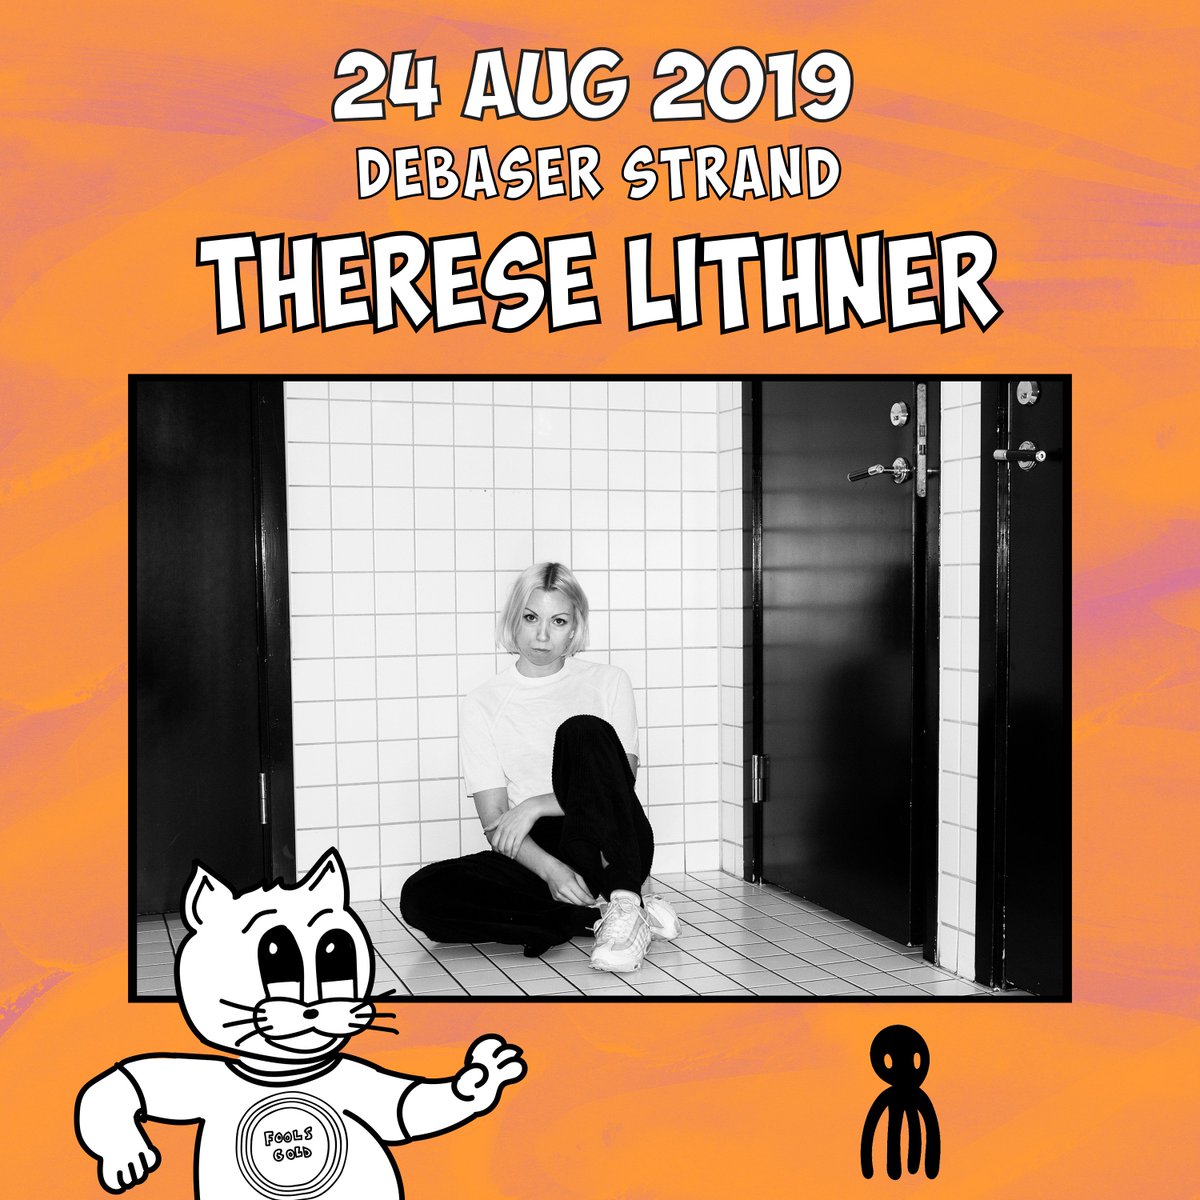 Therese Lithner [Lazy Octopus] and Cat Princess [Rama Lama] will join ShitKid [PNKSLM] at our Debaser afterparty! 🥳🥳 Event: bit.ly/fg19efterfest